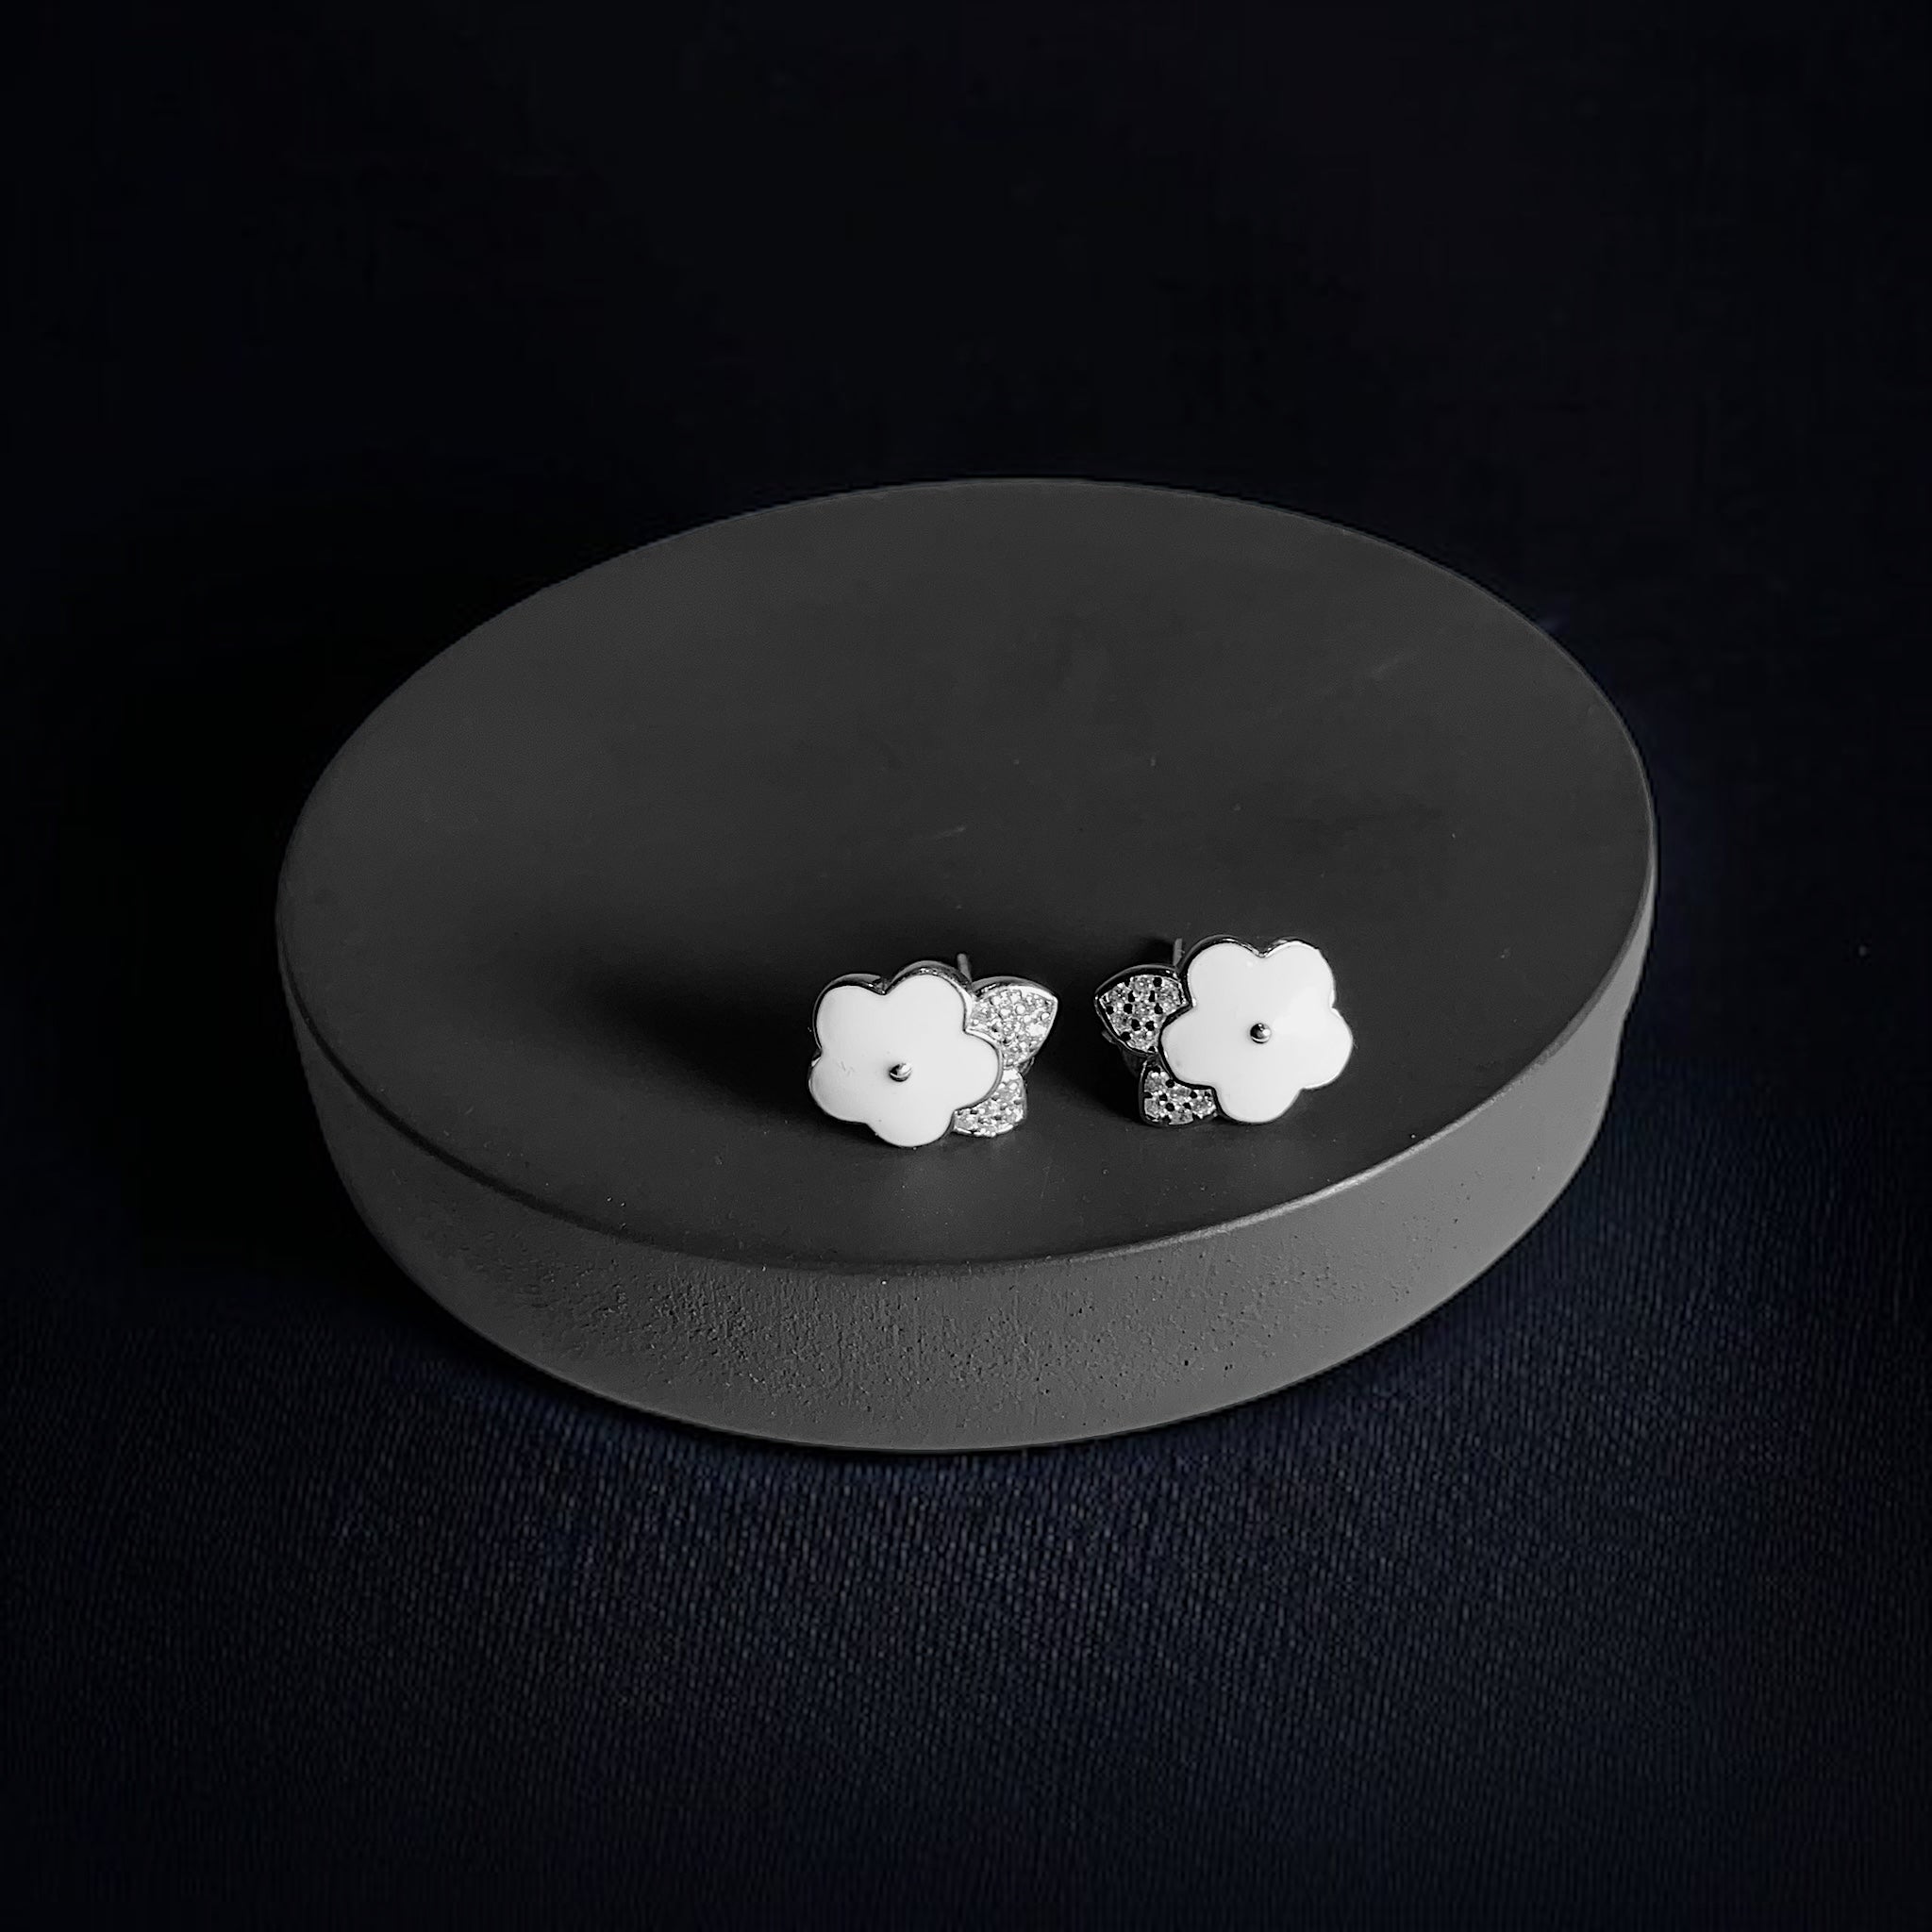 a pair of white flowers on a black plate